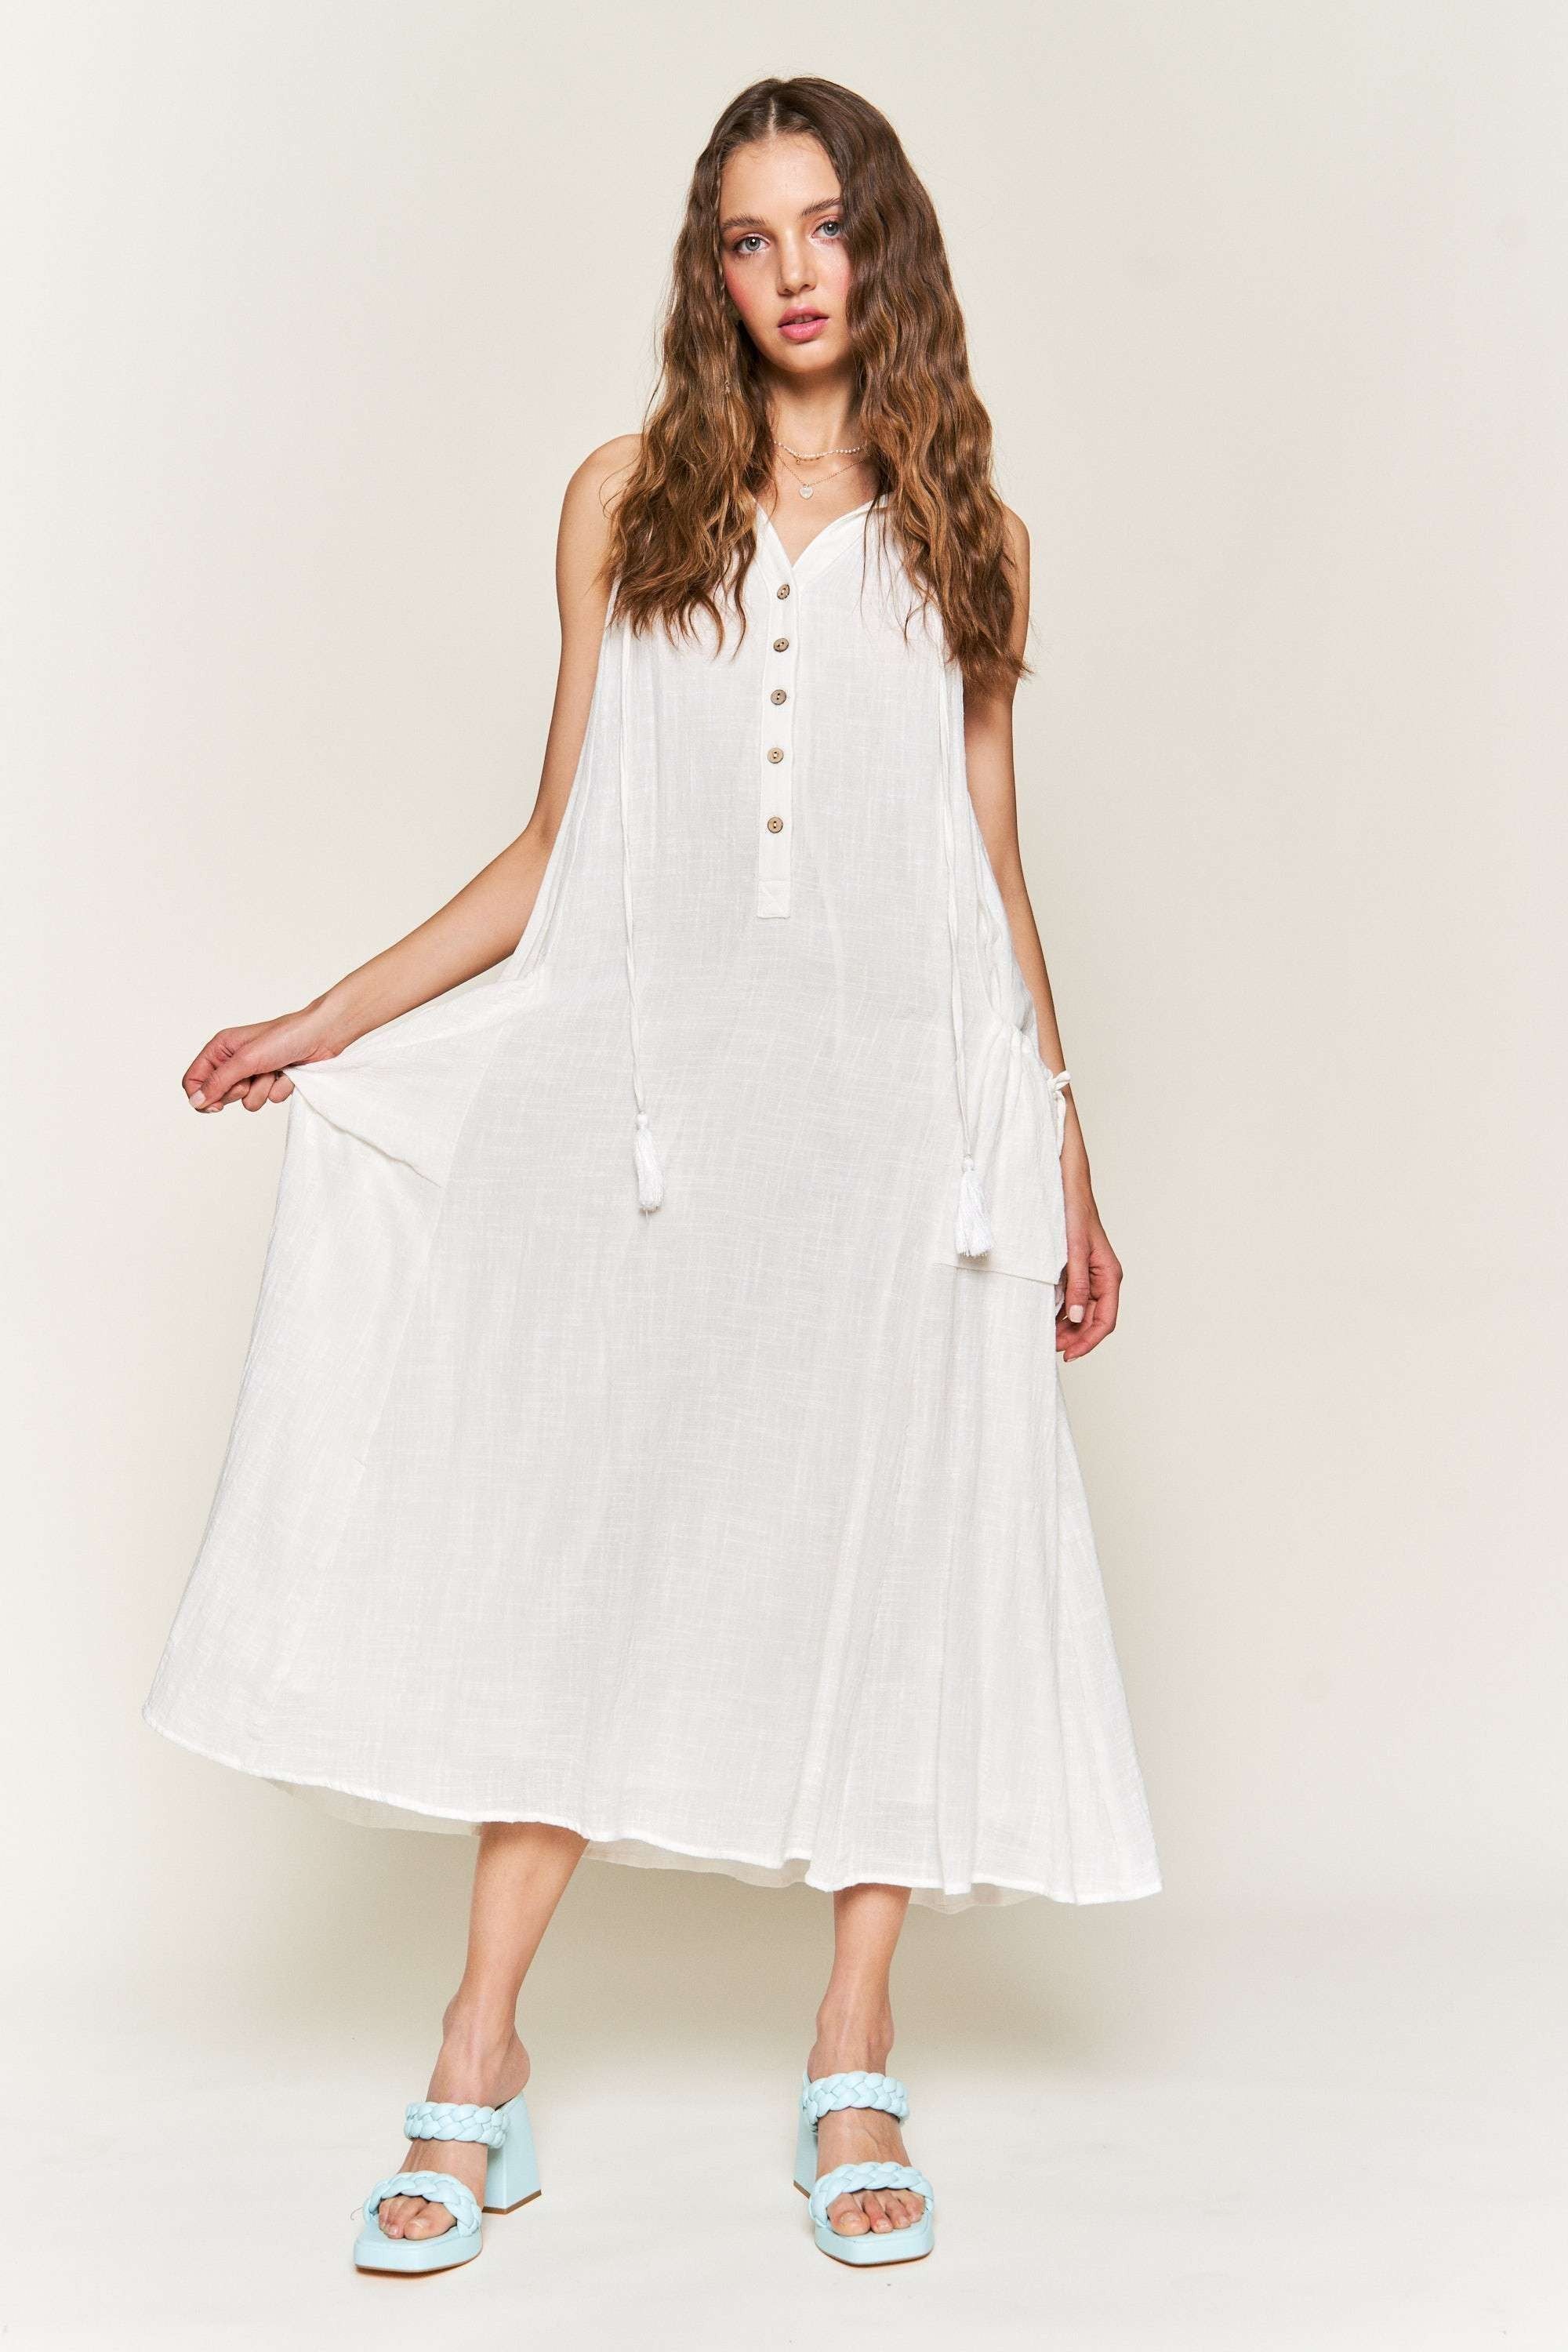 White Maxi Dress With Button Details | Collective Request 